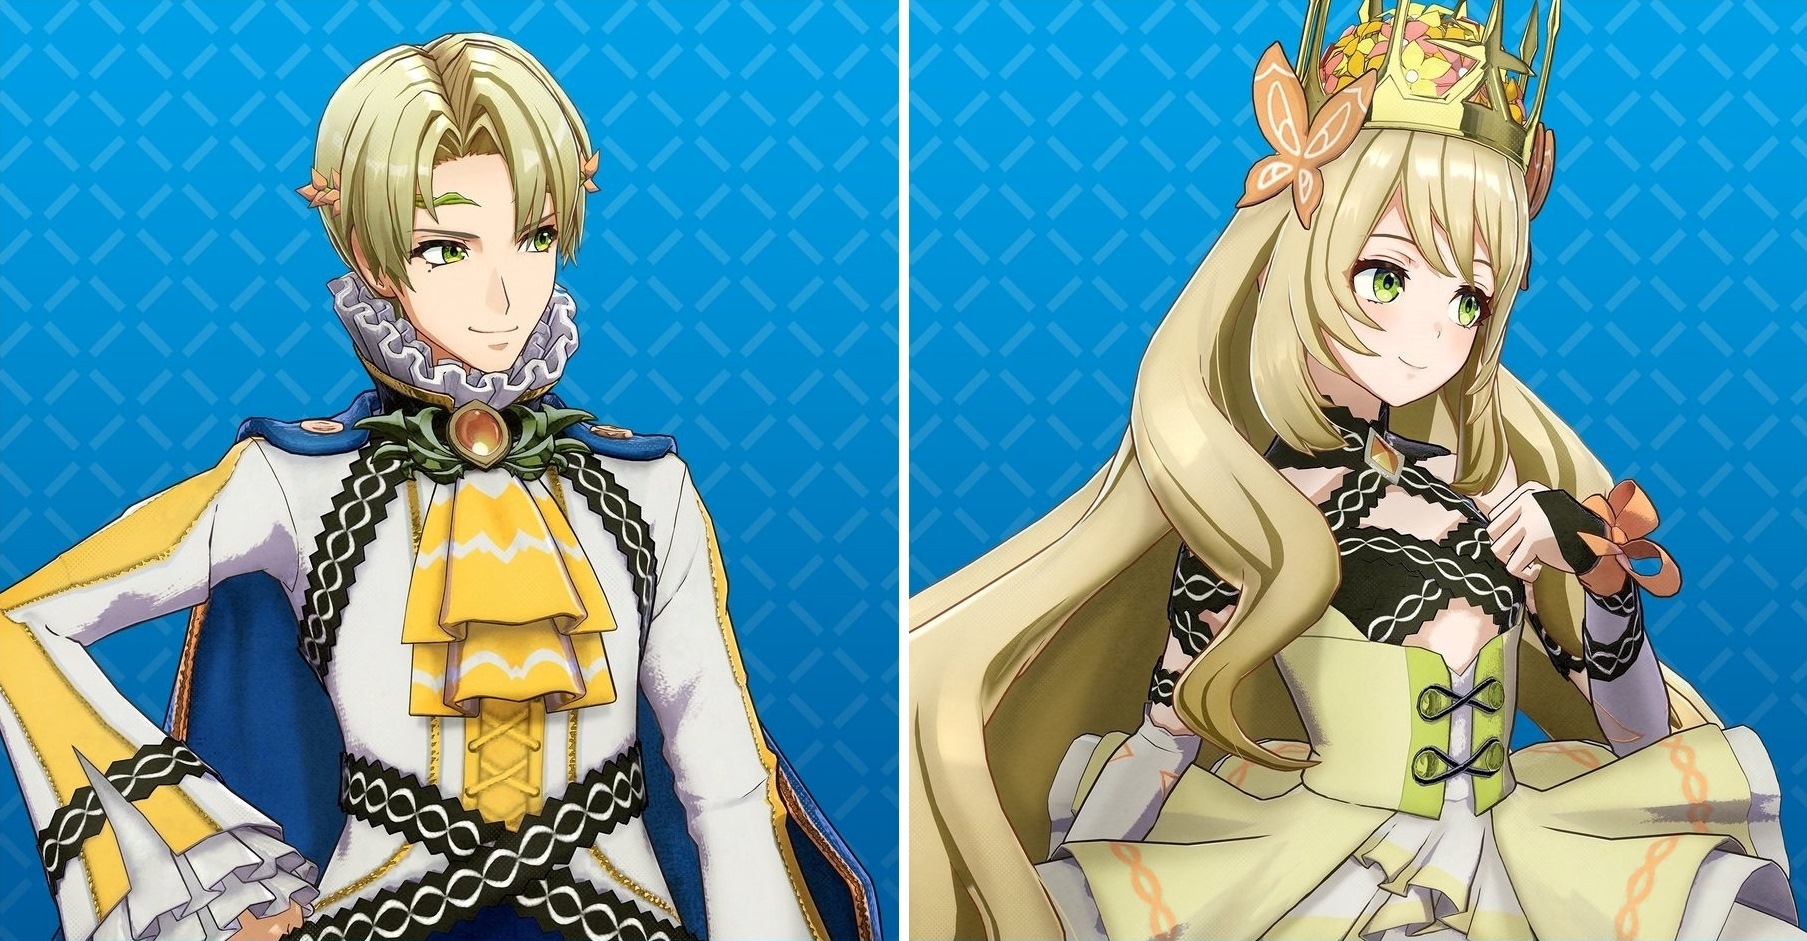 Fire Emblem Engage introduces Alfred and Celine